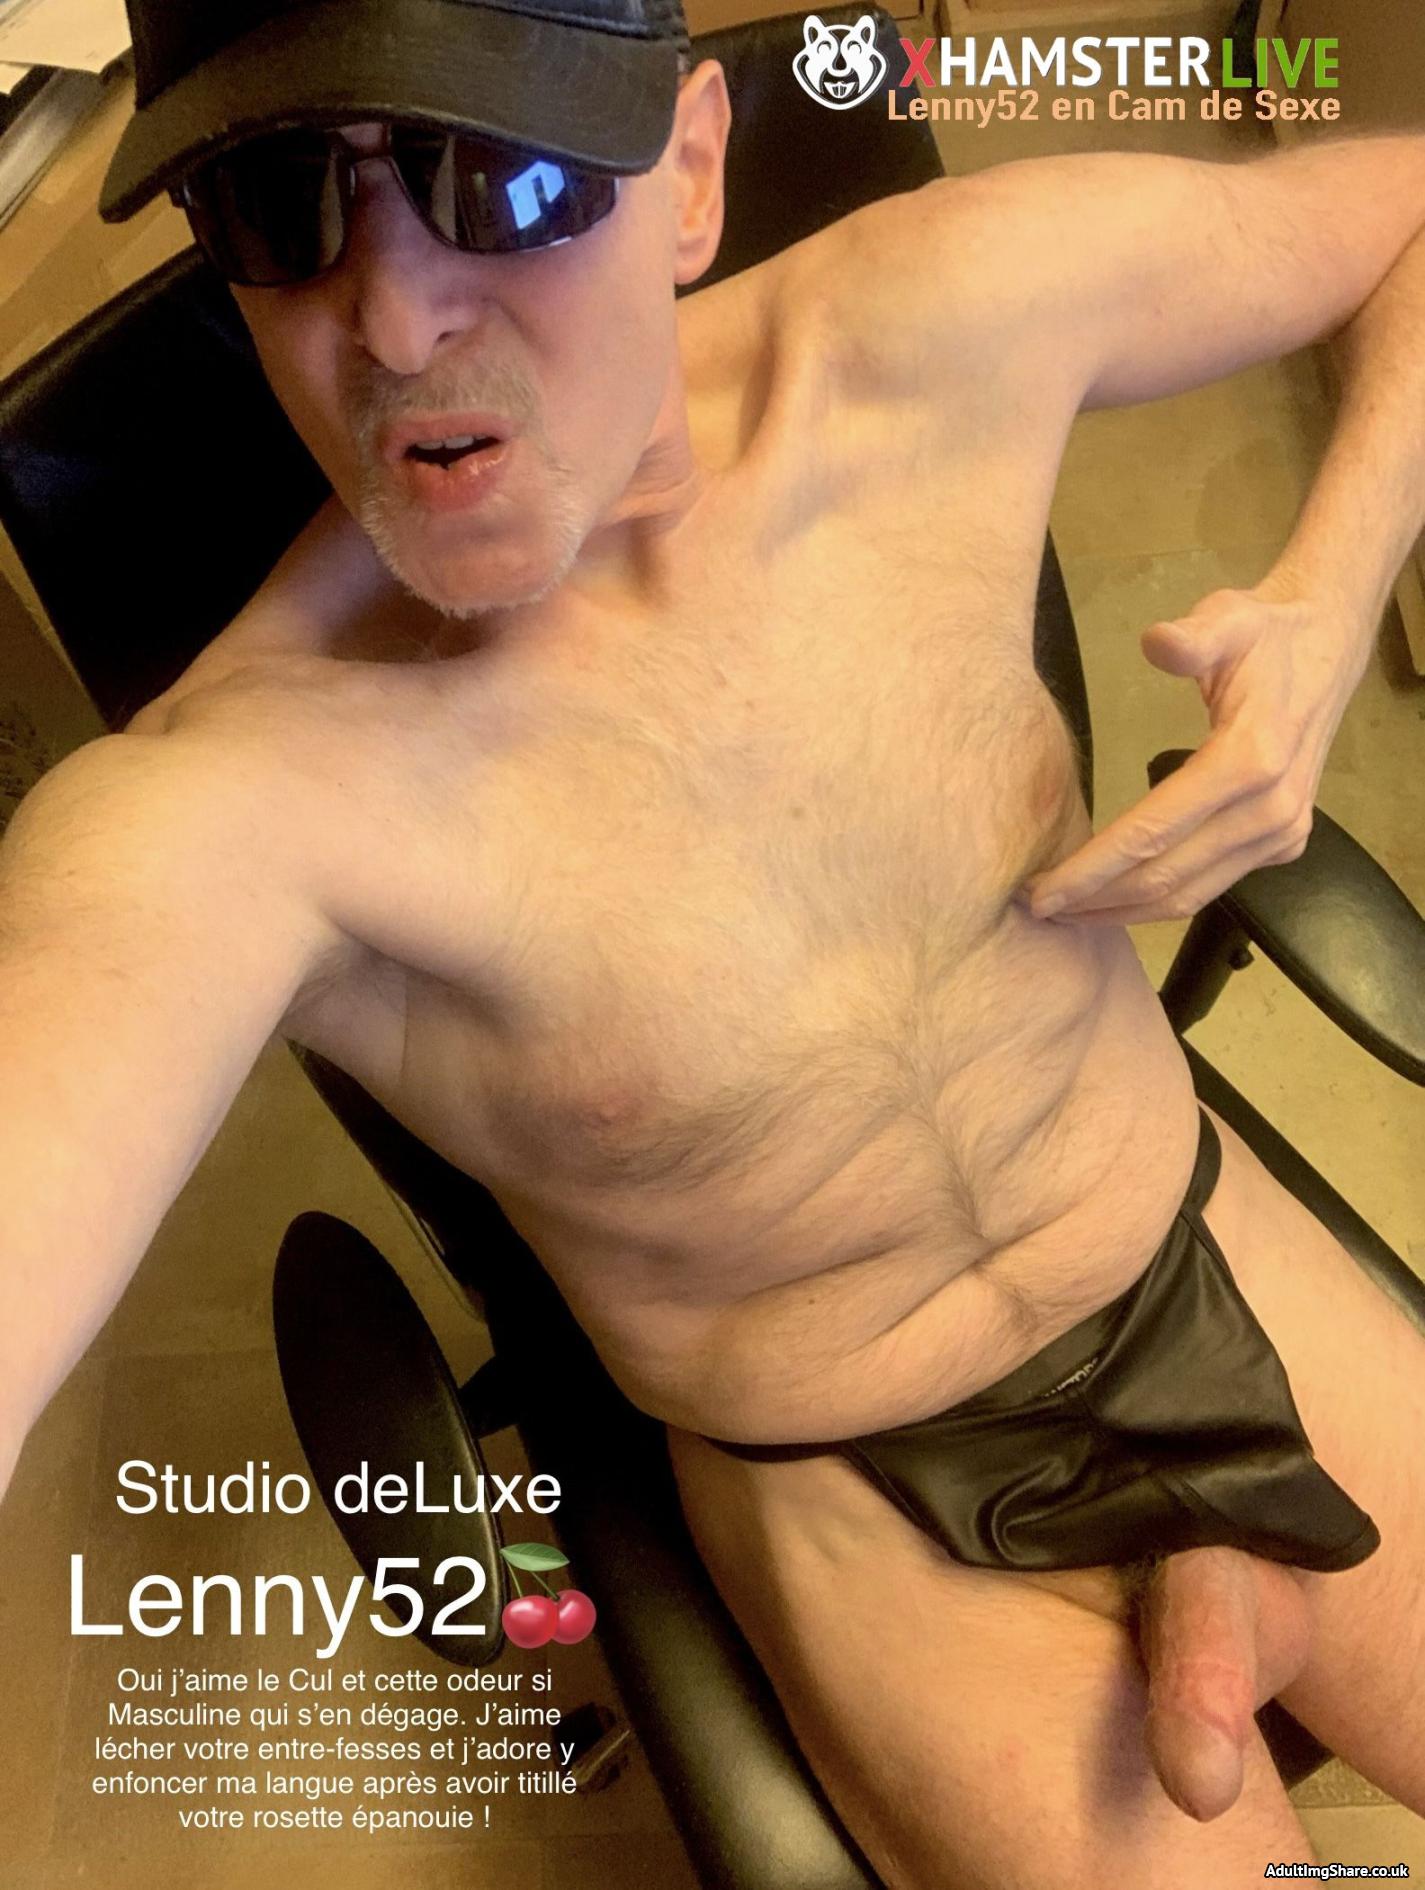 LennyL52 Lenny52 the manager goes live ... in the nude